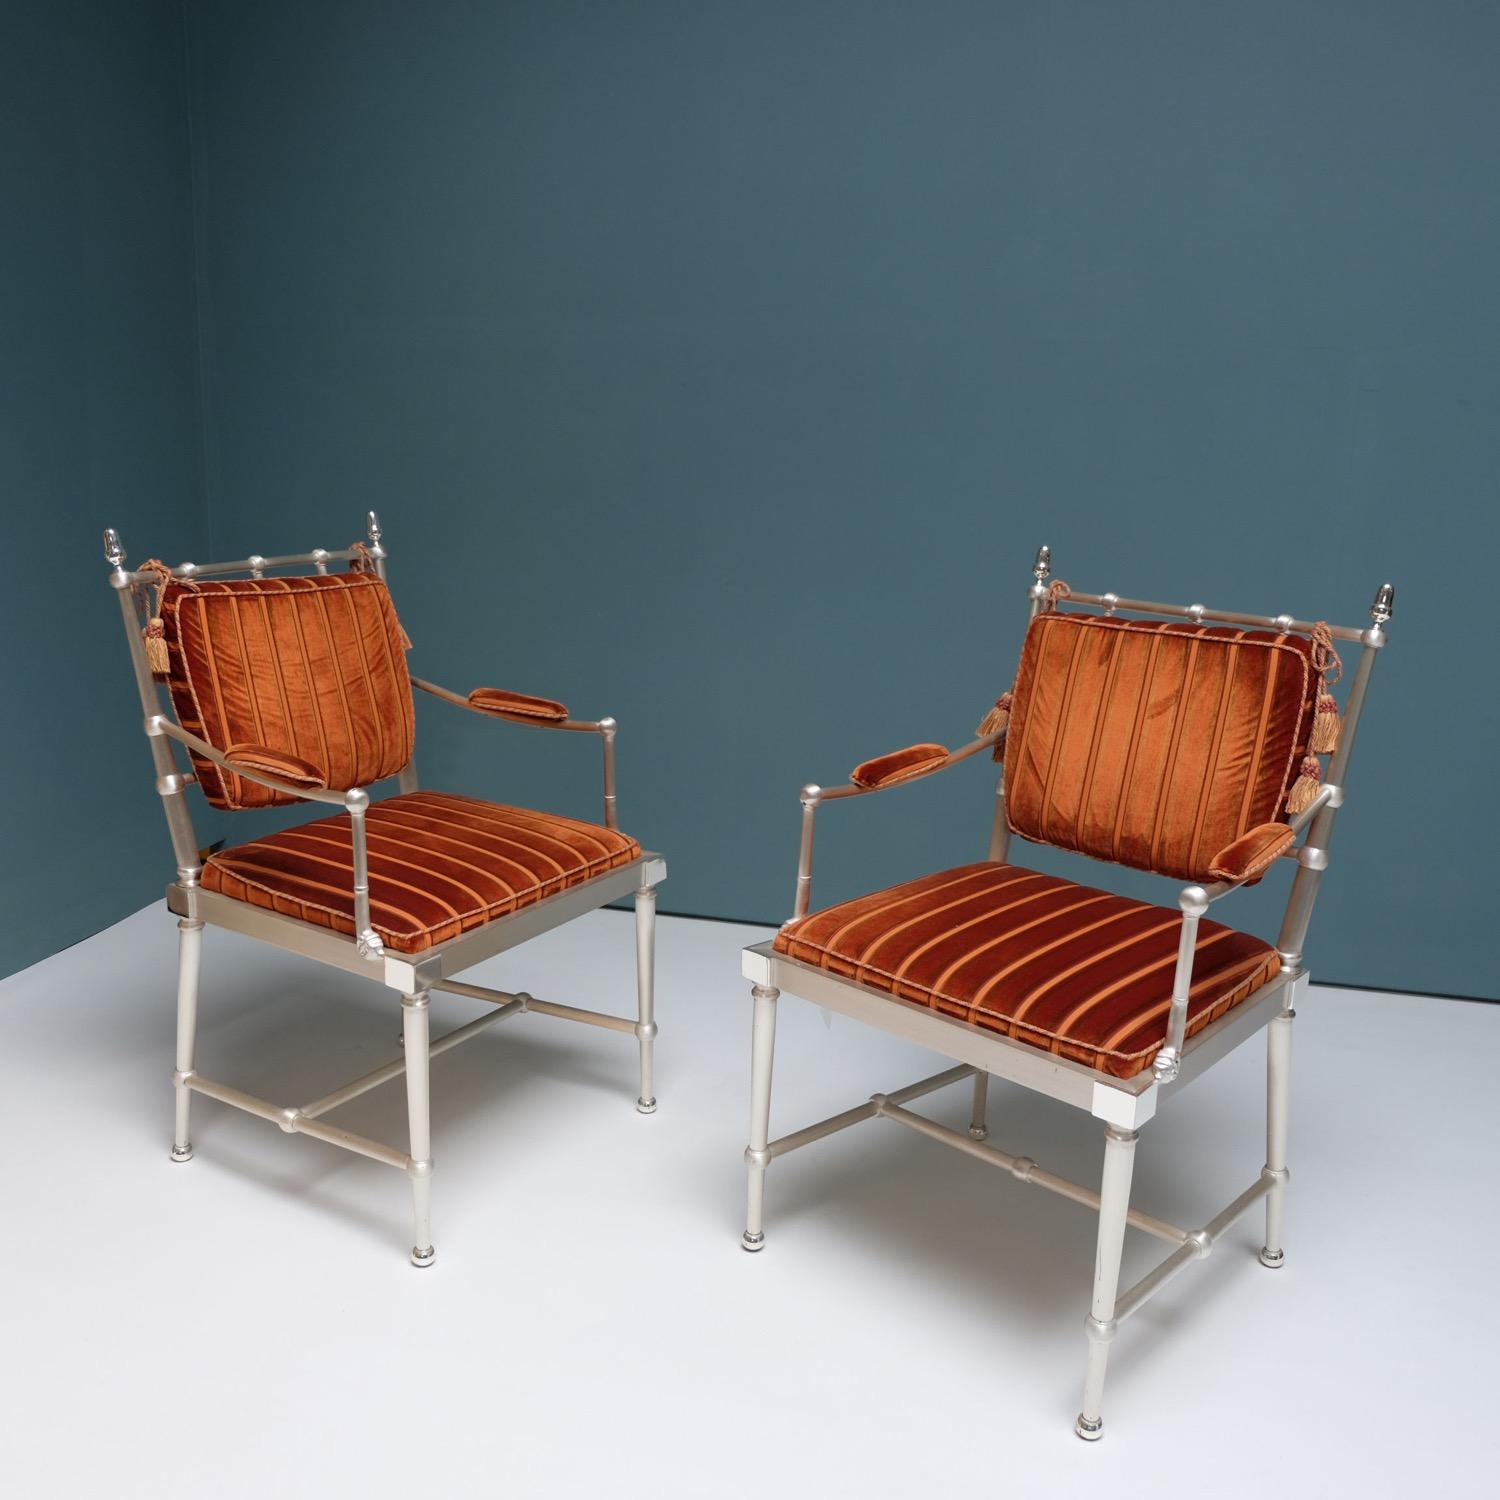 A stunning and unique pair of 1980s brushed and polished nickel armchairs. The armchairs have been attributed to Christian Dior. The cushions have been recovered in a burnt orange deep velvet fabric with contrasting orange stripes. A pair of tassels